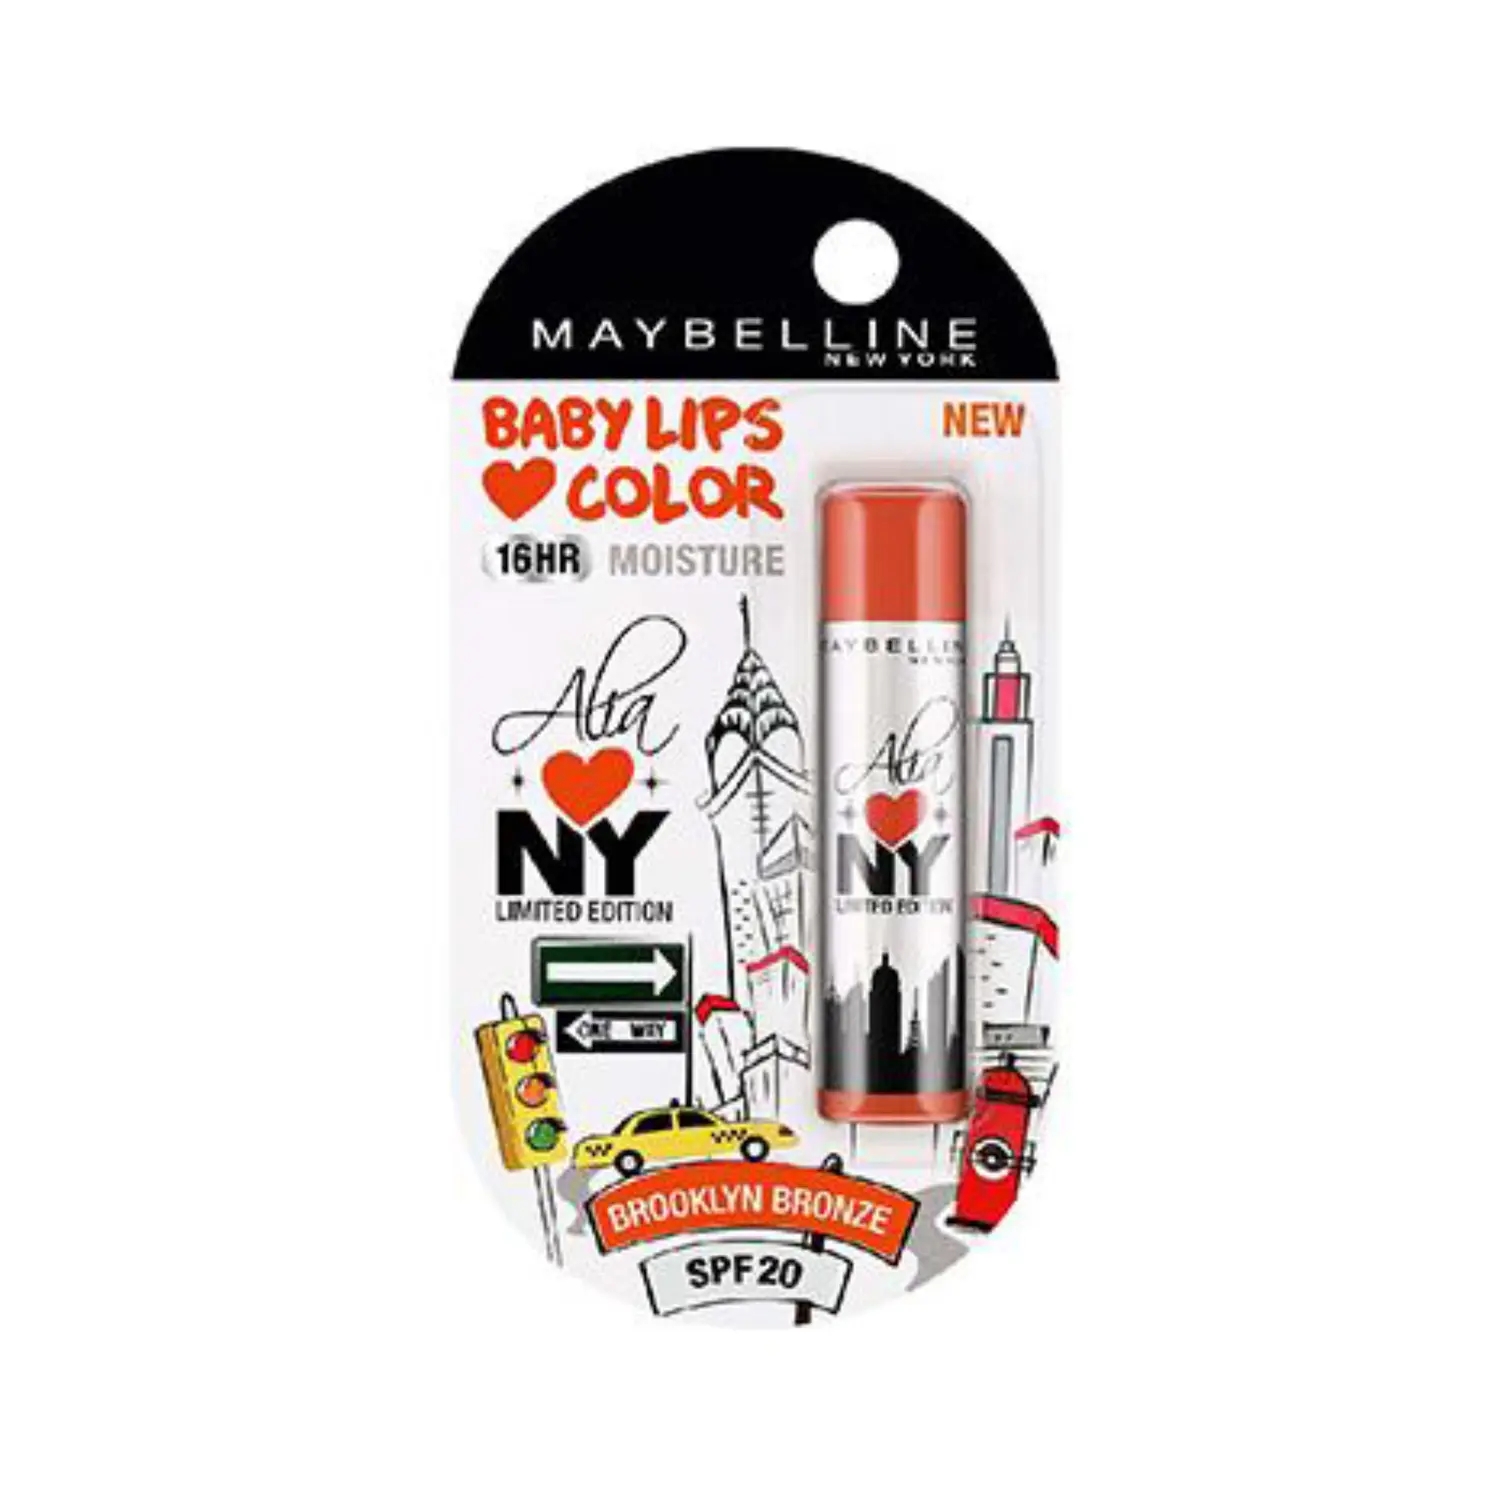 Maybelline New York | Maybelline New York Baby Lips Colour Limited Edition Lip Balm - Brooklyn Bronze (4g)